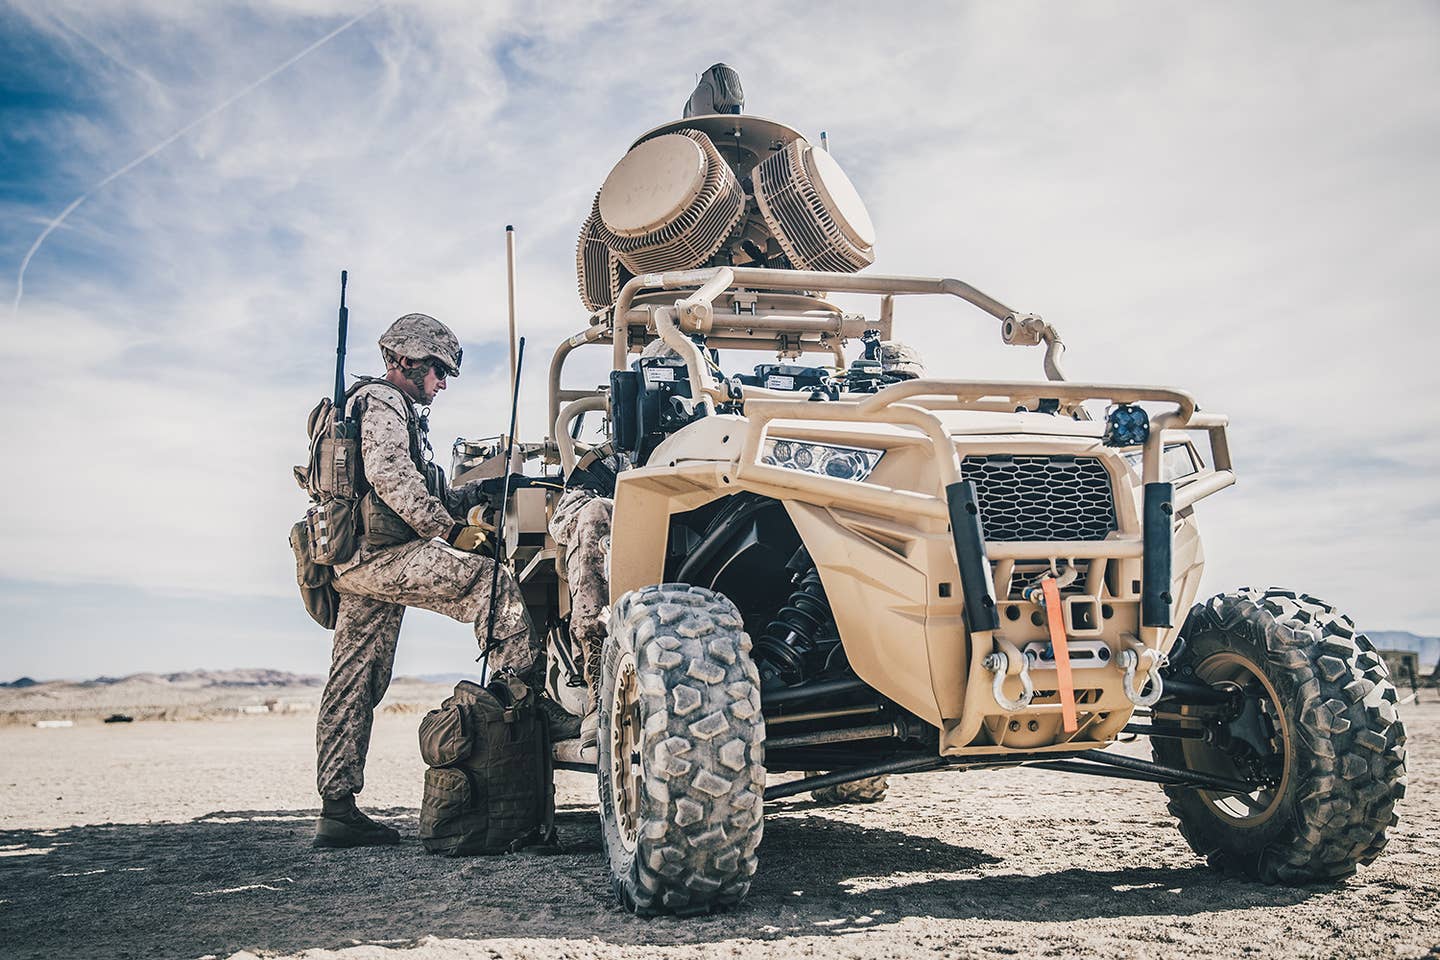 The US Marine Corps' all-terrain vehicle-mounted Light Marine Air Defense Integrated System is an example of a counter-drone jamming system currently in service. <em>USMC</em>